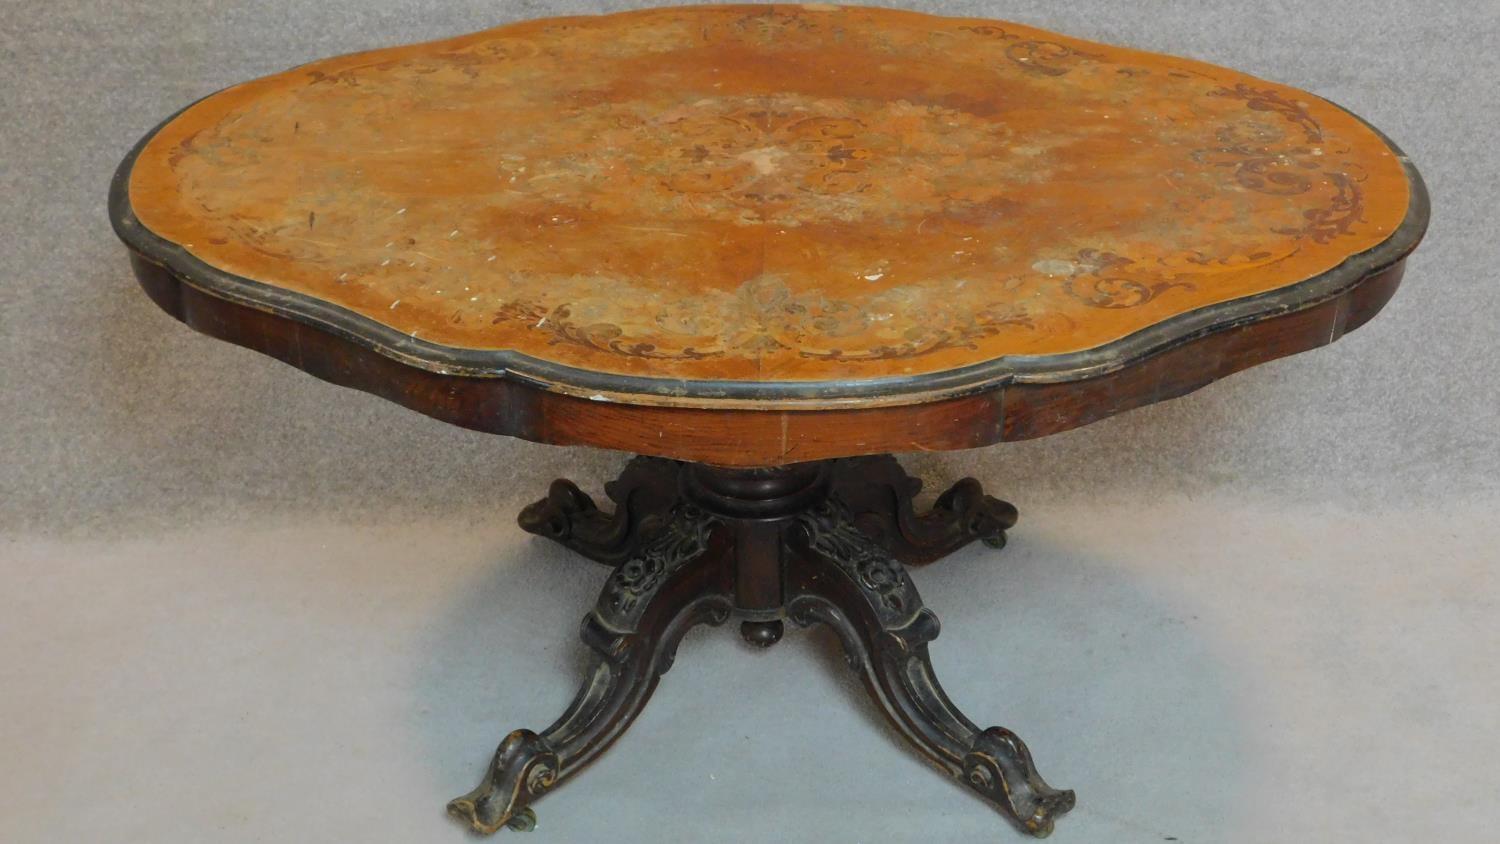 A late 19th century walnut and marquetry inlaid shaped top dining table on well carved quadruped